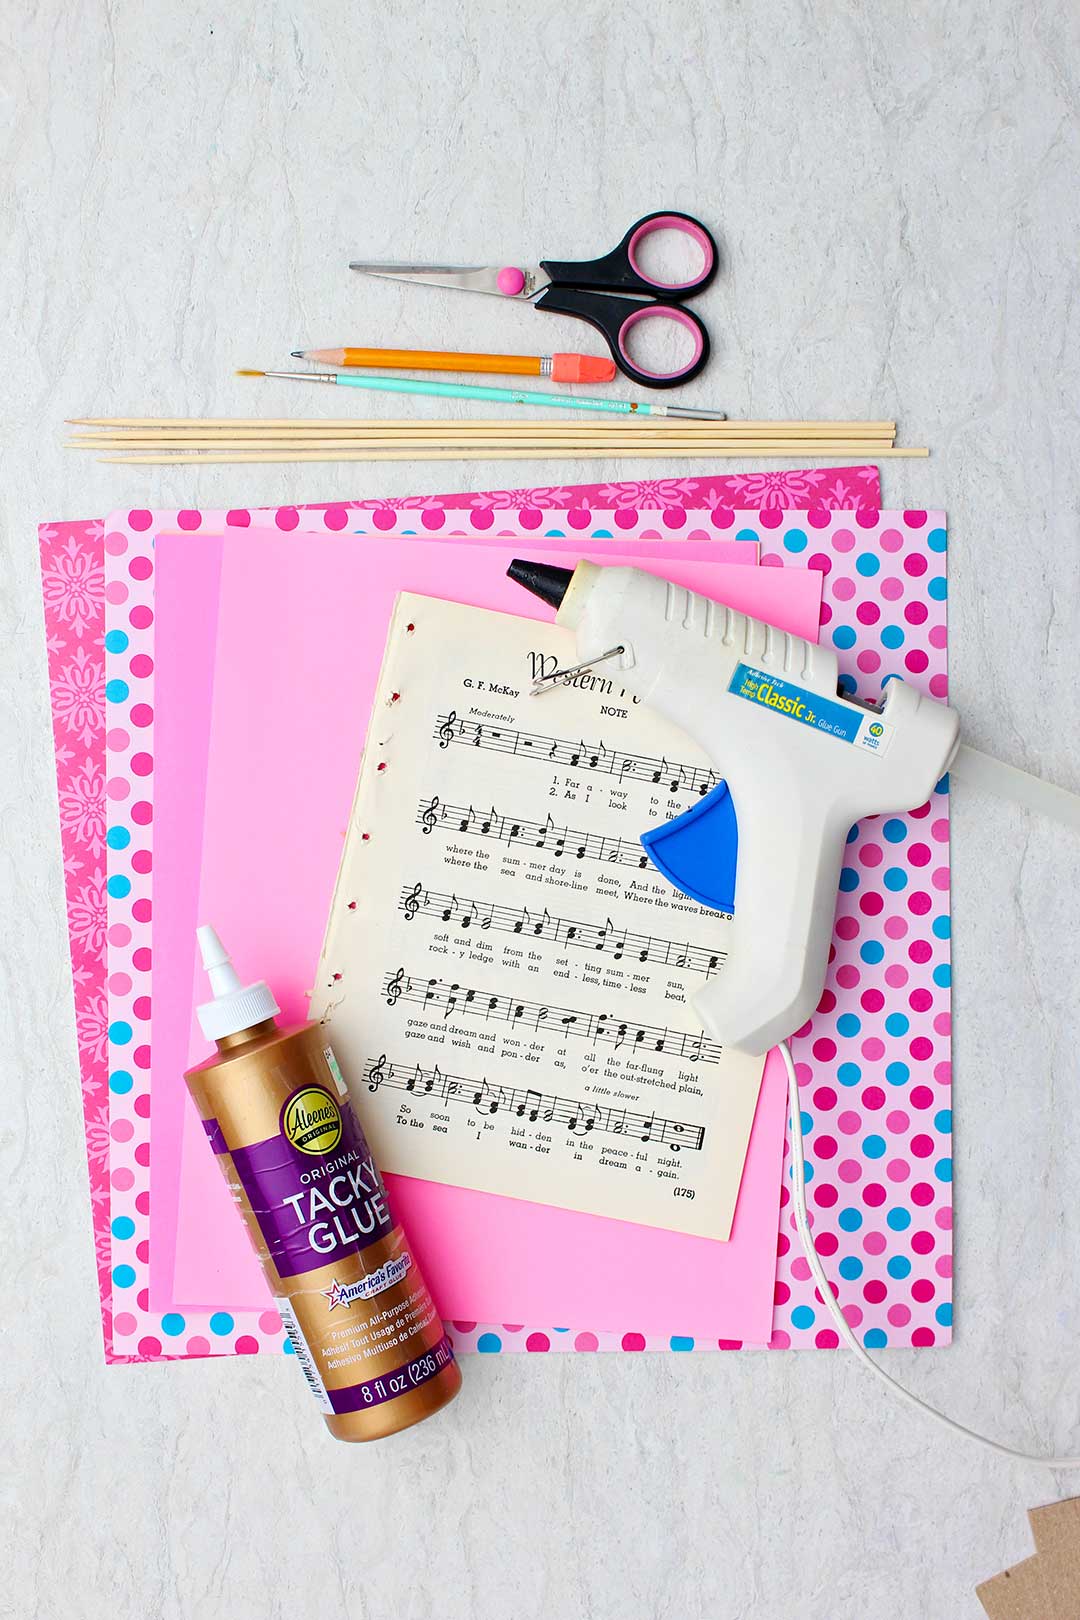 Supplies for making Book Page Roses. Sheet music, hot glue gun, wooden dowels, Tacky Glue, scissors and scrapbook paper.